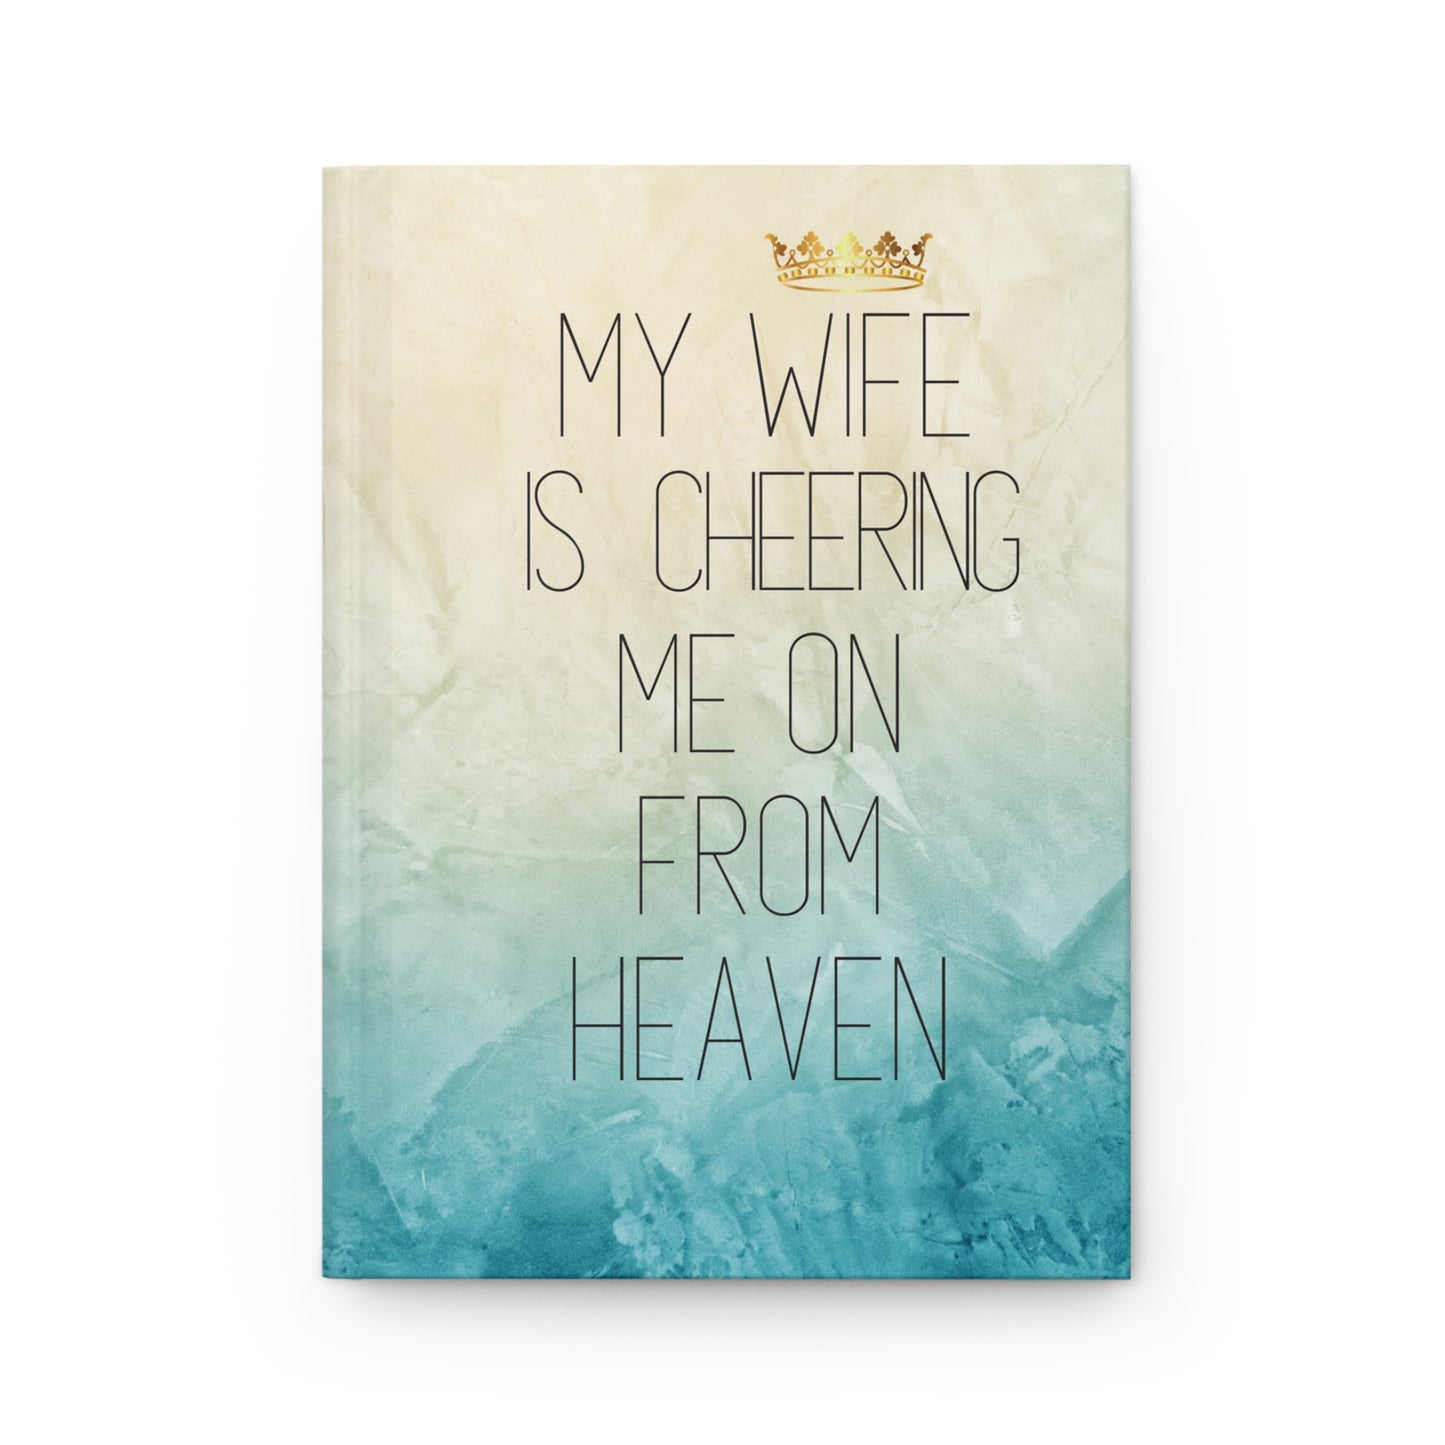 Grief Journal for Loss of Wife, Cheering Me On From Heaven